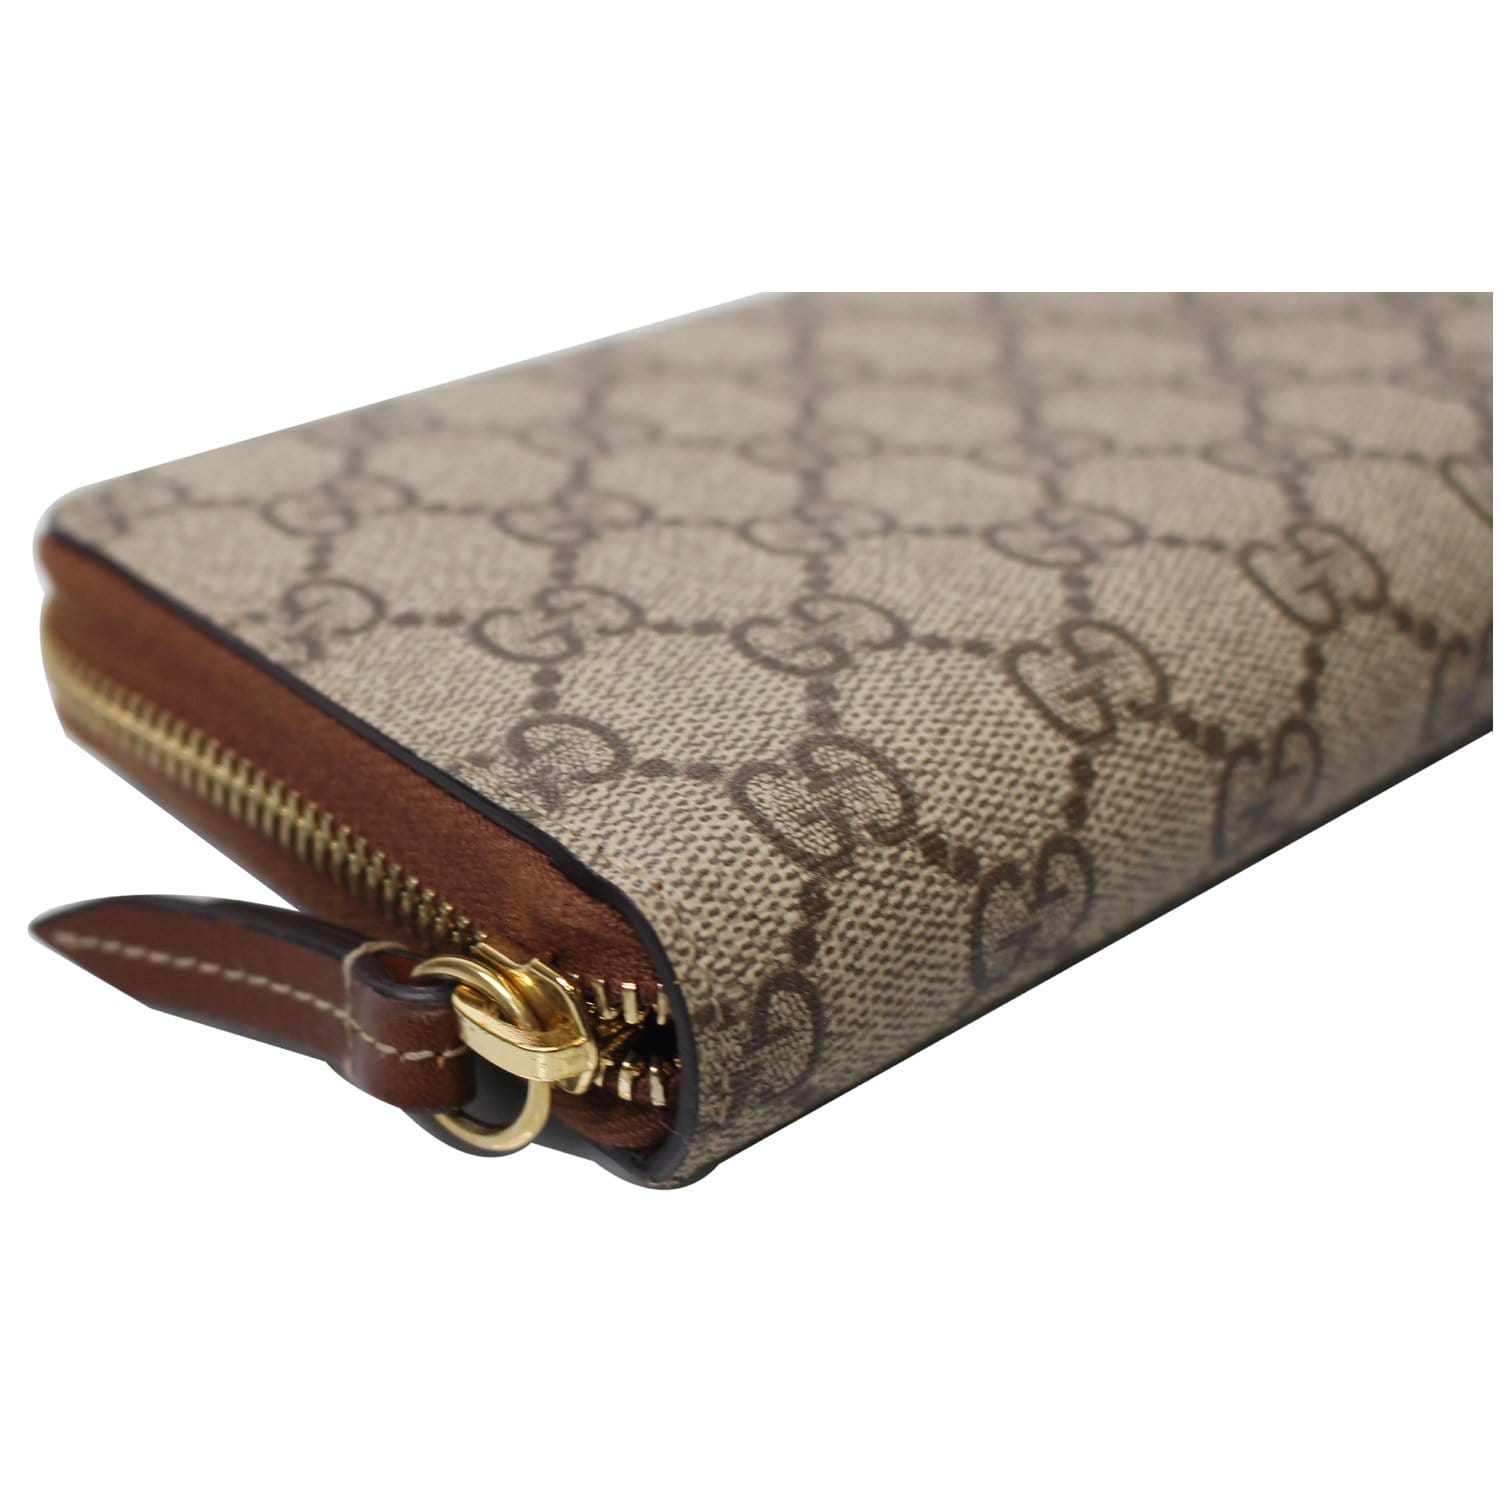 Gucci - GG supreme fabric and leather wallet Beige - The Corner